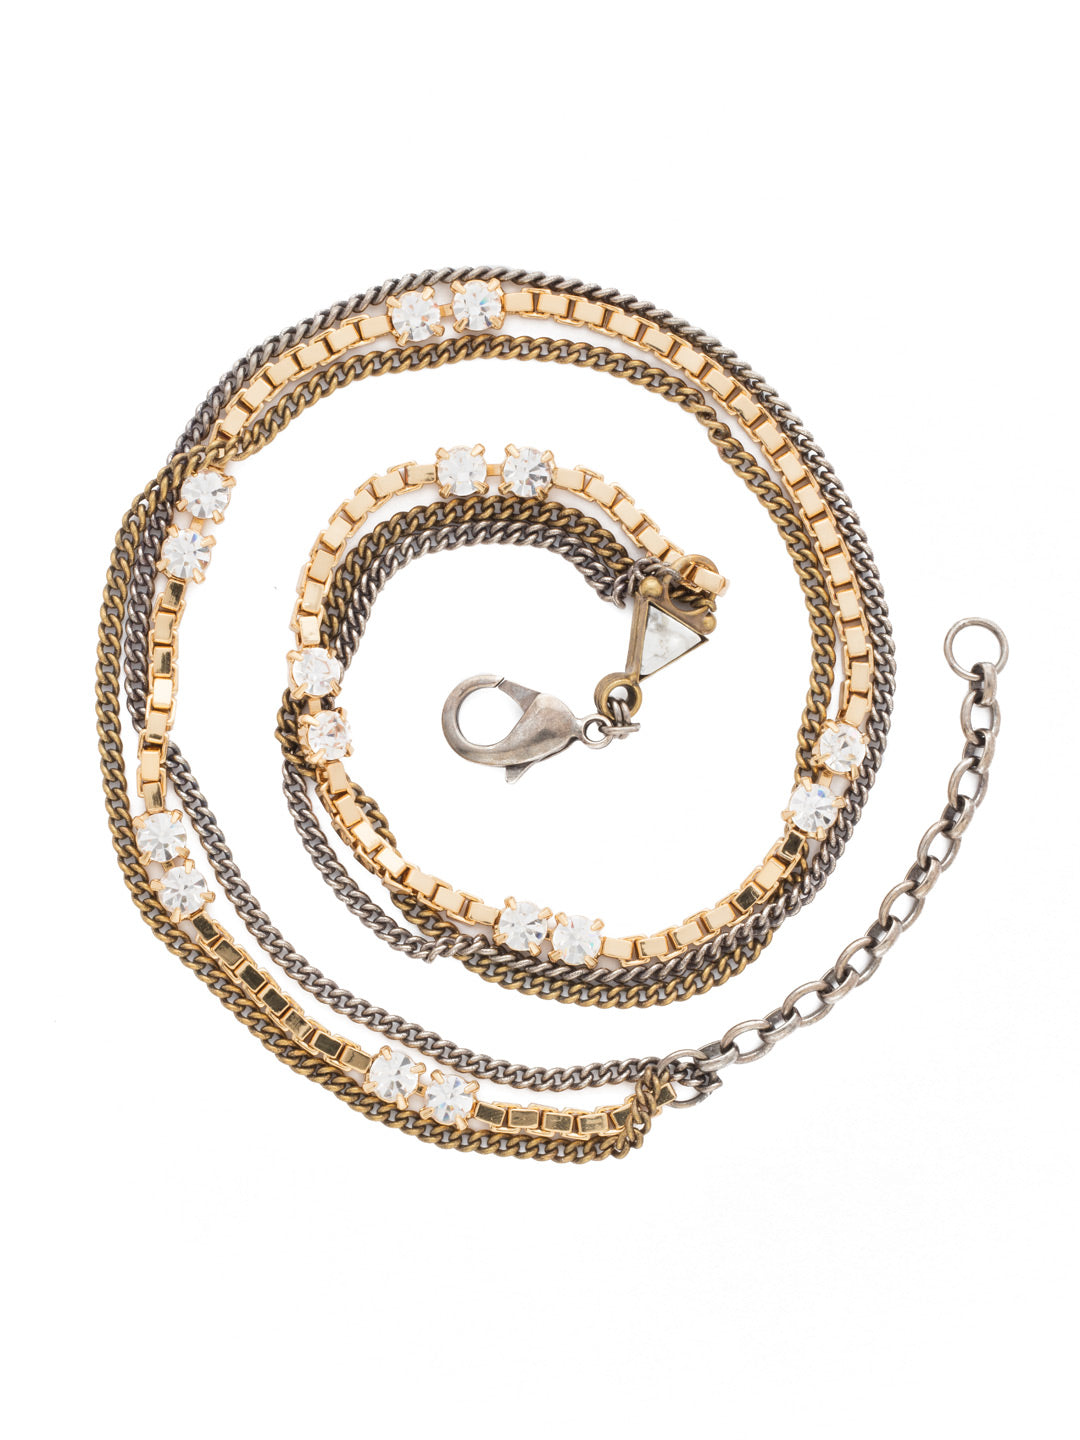 It's a Wrap Layered Bracelet - BDM5MXCRY - <p>Great style is all wrapped up with this mixed metal and crystal wrap bracelet. As an added bonus, you can also wear this style as a necklace! From Sorrelli's Crystal collection in our Mixed Metal finish.</p>